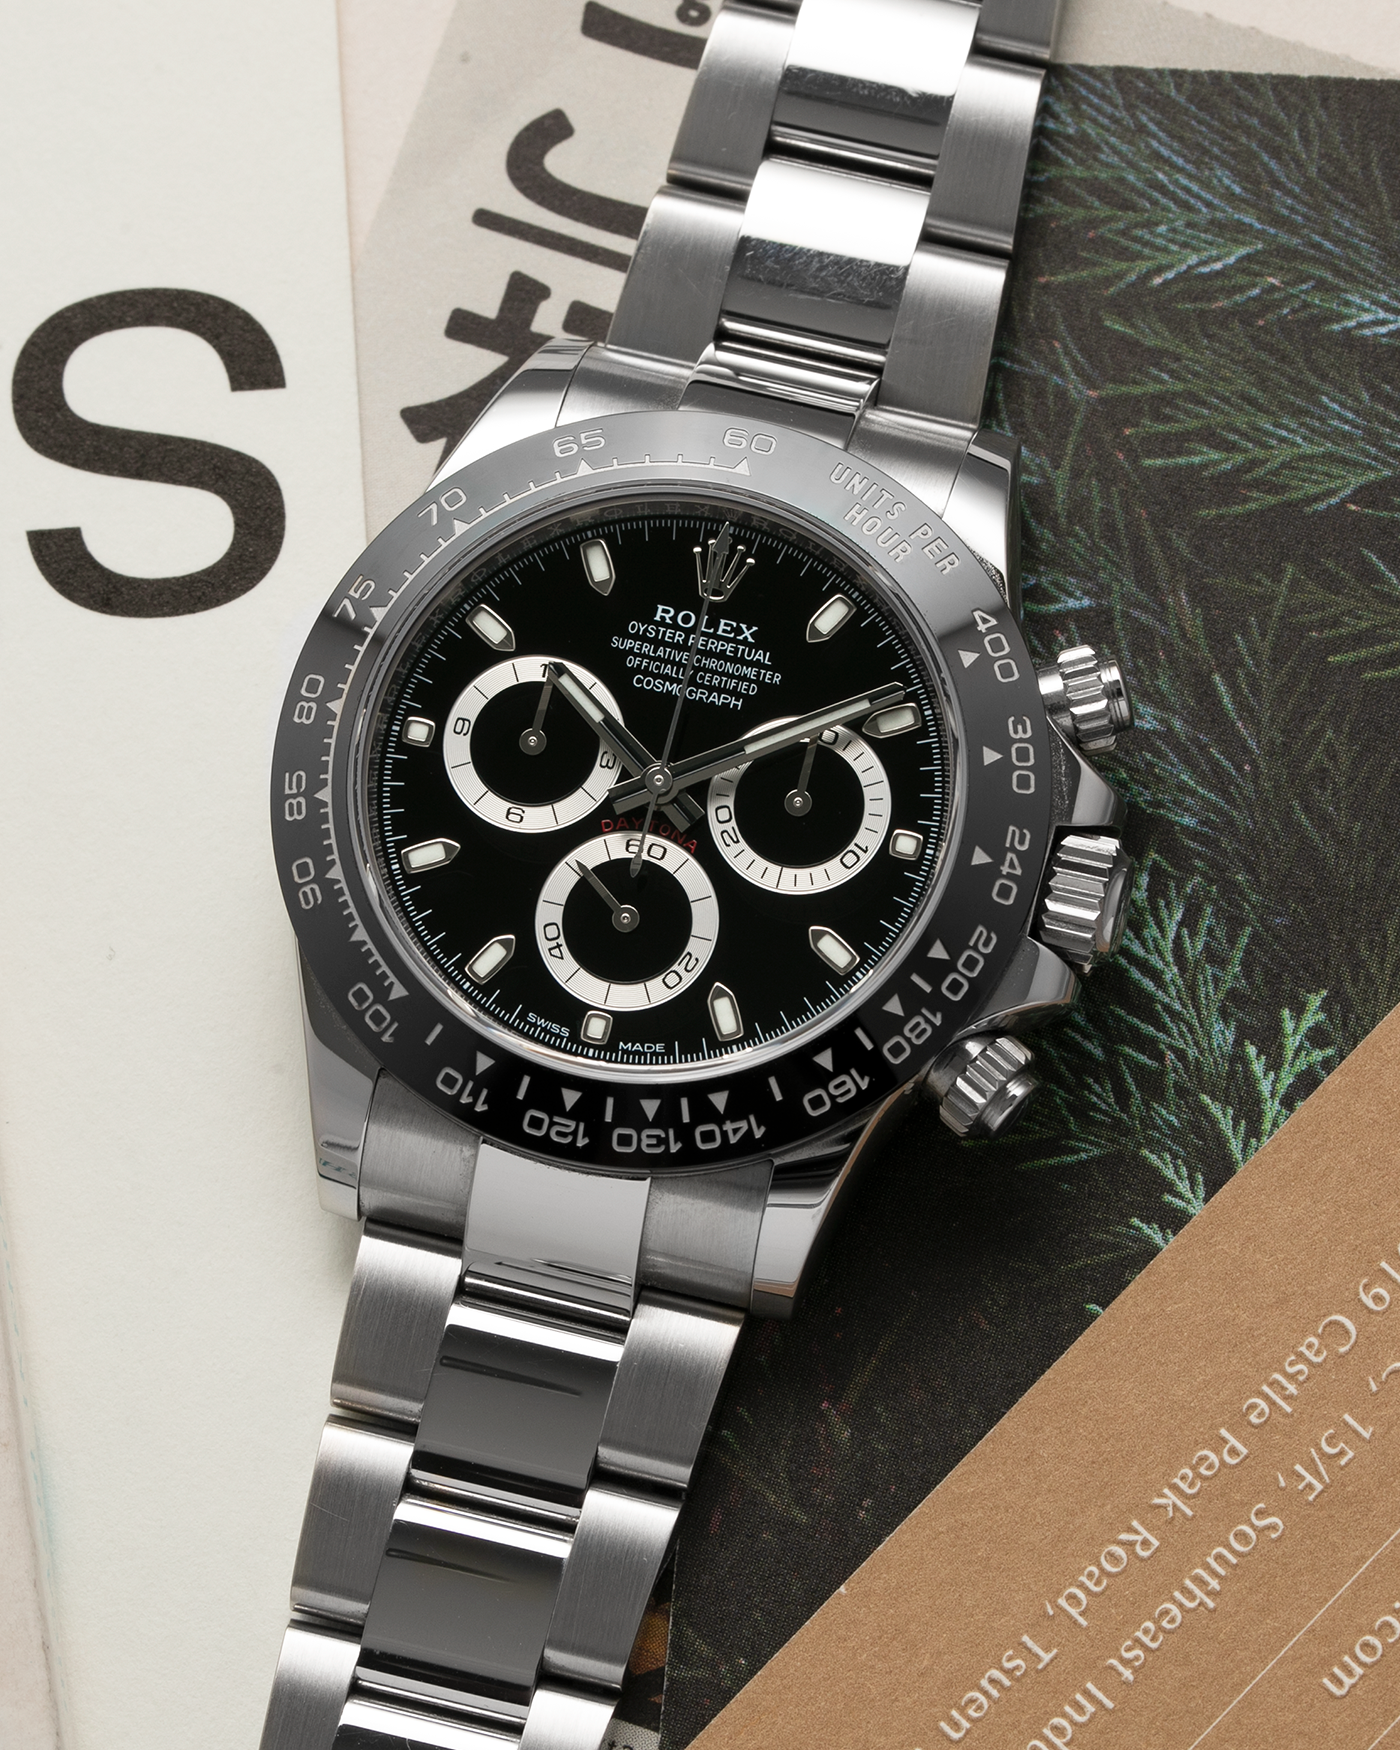 Brand: Rolex Year: 2016 Model: Daytona Reference: 116500 Material: Stainless Steel Movement: Calibre 4130 Case Diameter: 40mm Strap: Stainless Steel Rolex Oyster Bracelet